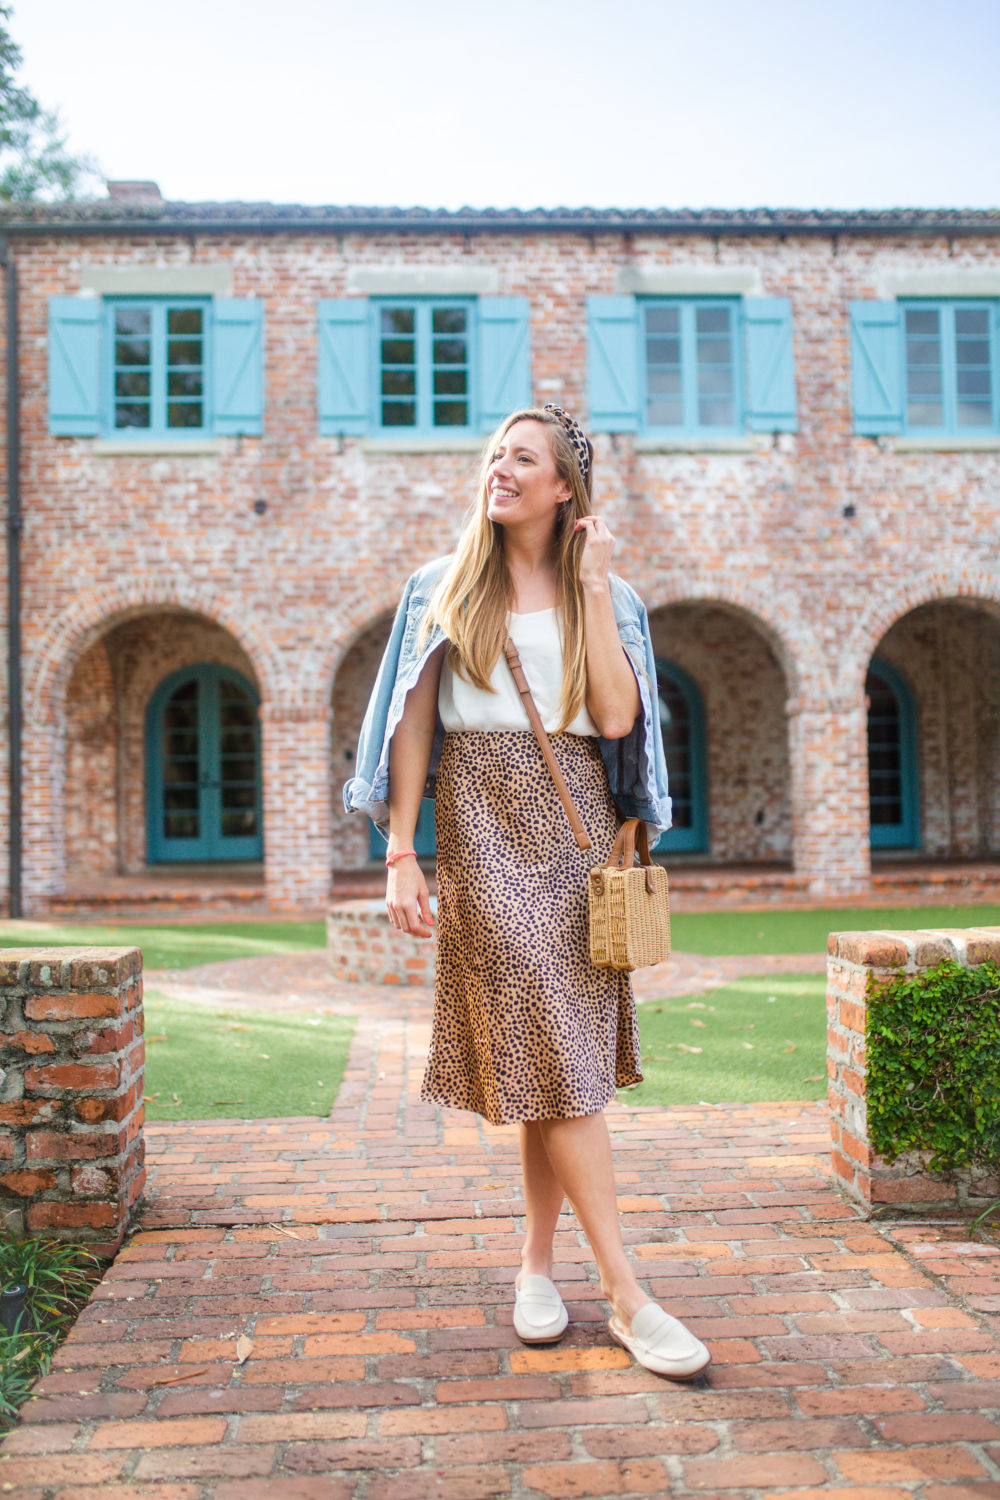 How to Style a Leopard Skirt / What to Wear for a Casual Weekend Outfit /How to Style a Leopard Skirt Casually / How to Style a Midi Skirt - Sunshine Style - A Florida based Fashion blog